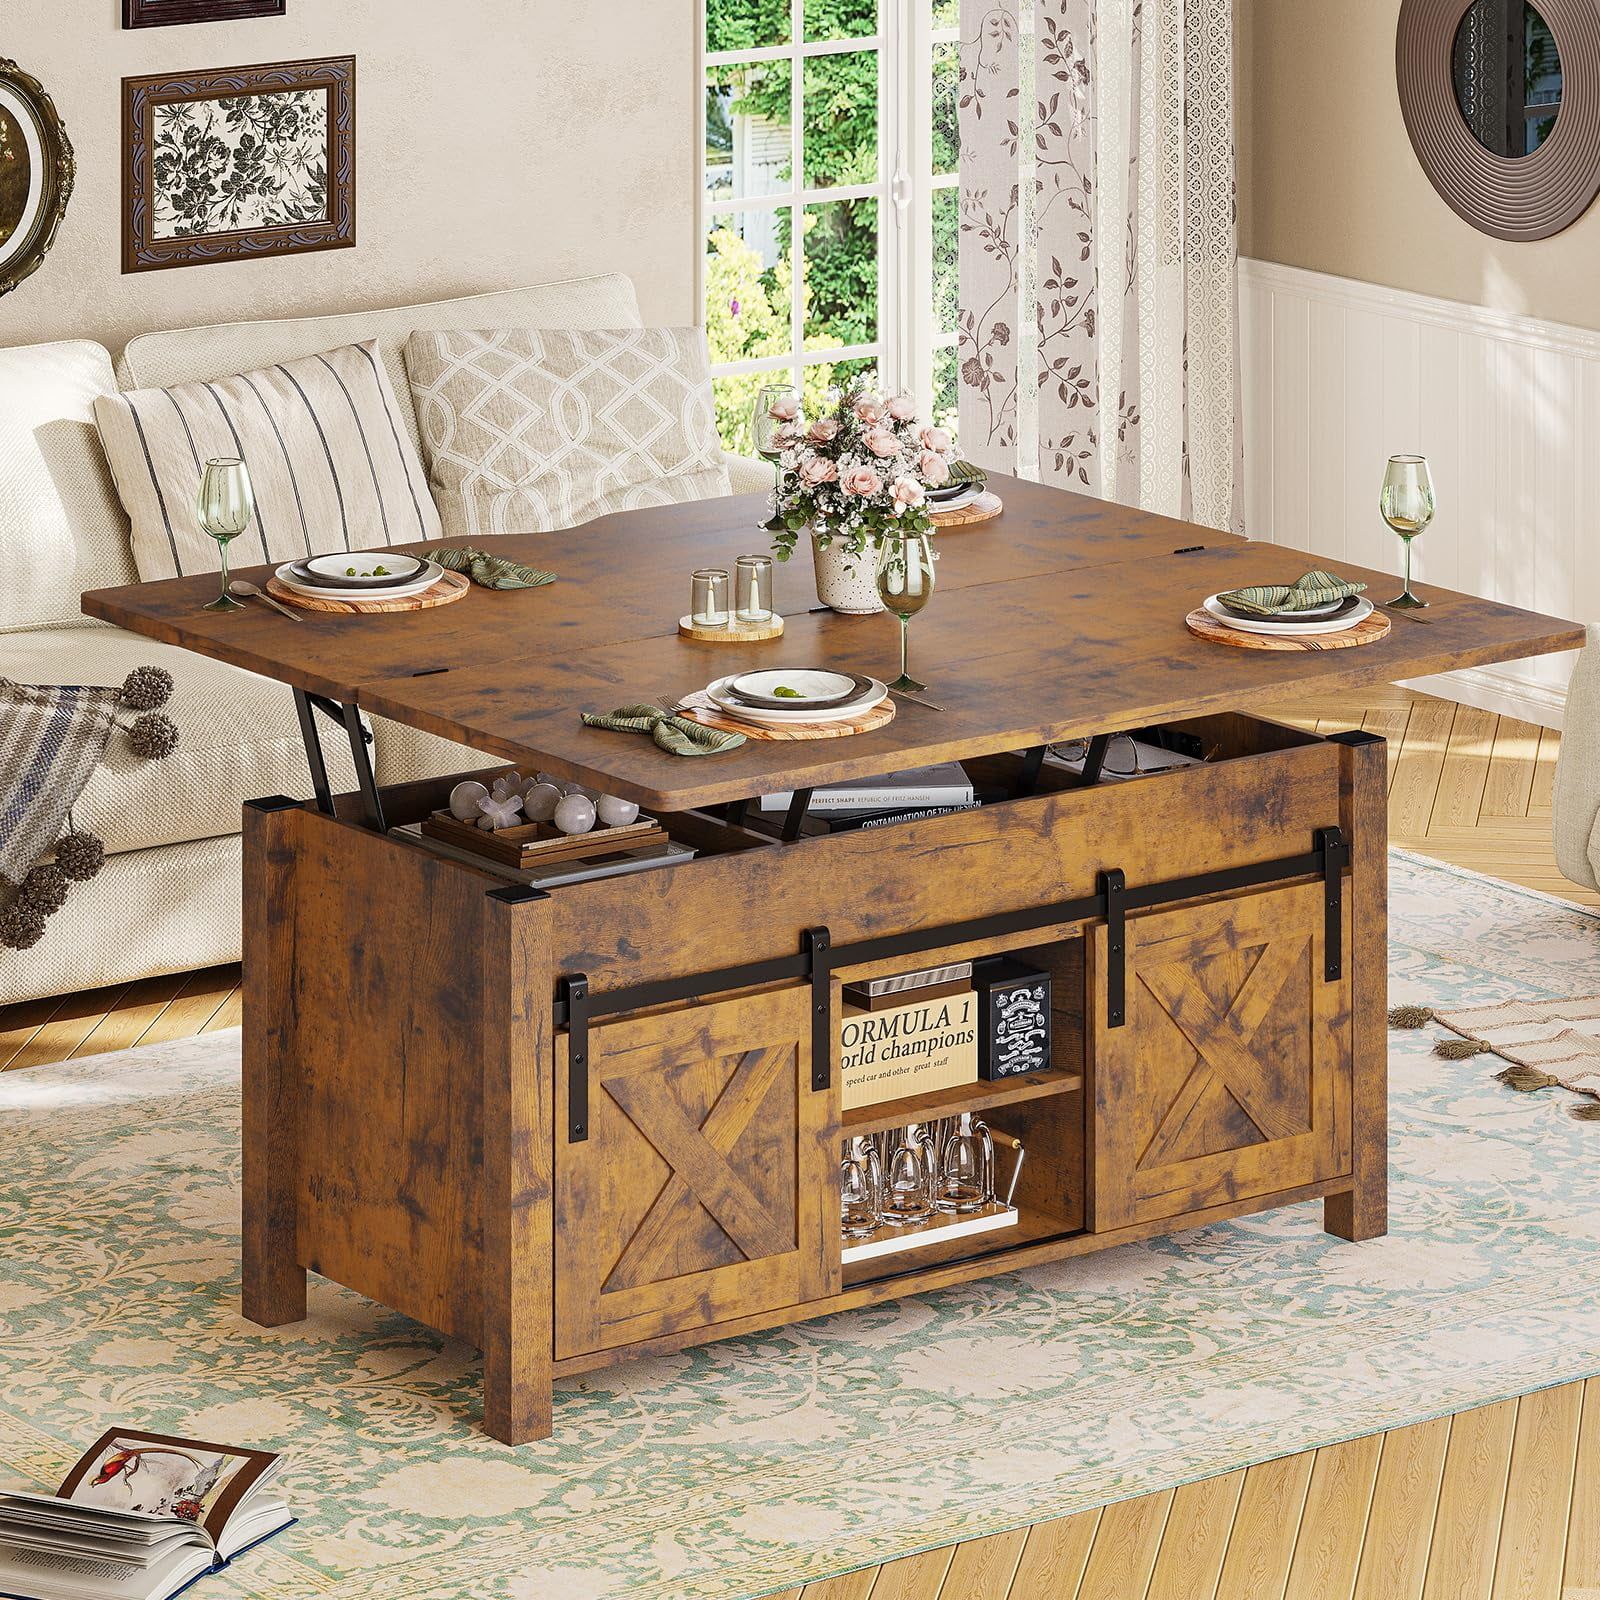 Coffee Table For Living Room, Farmhouse Lift Top Coffee Tables With Storage  And Hidden Compartment, Rising Tabletop Center Table For Living Room  Reception Room, Rustic Brown – Walmart Regarding Coffee Tables With Storage (View 15 of 15)